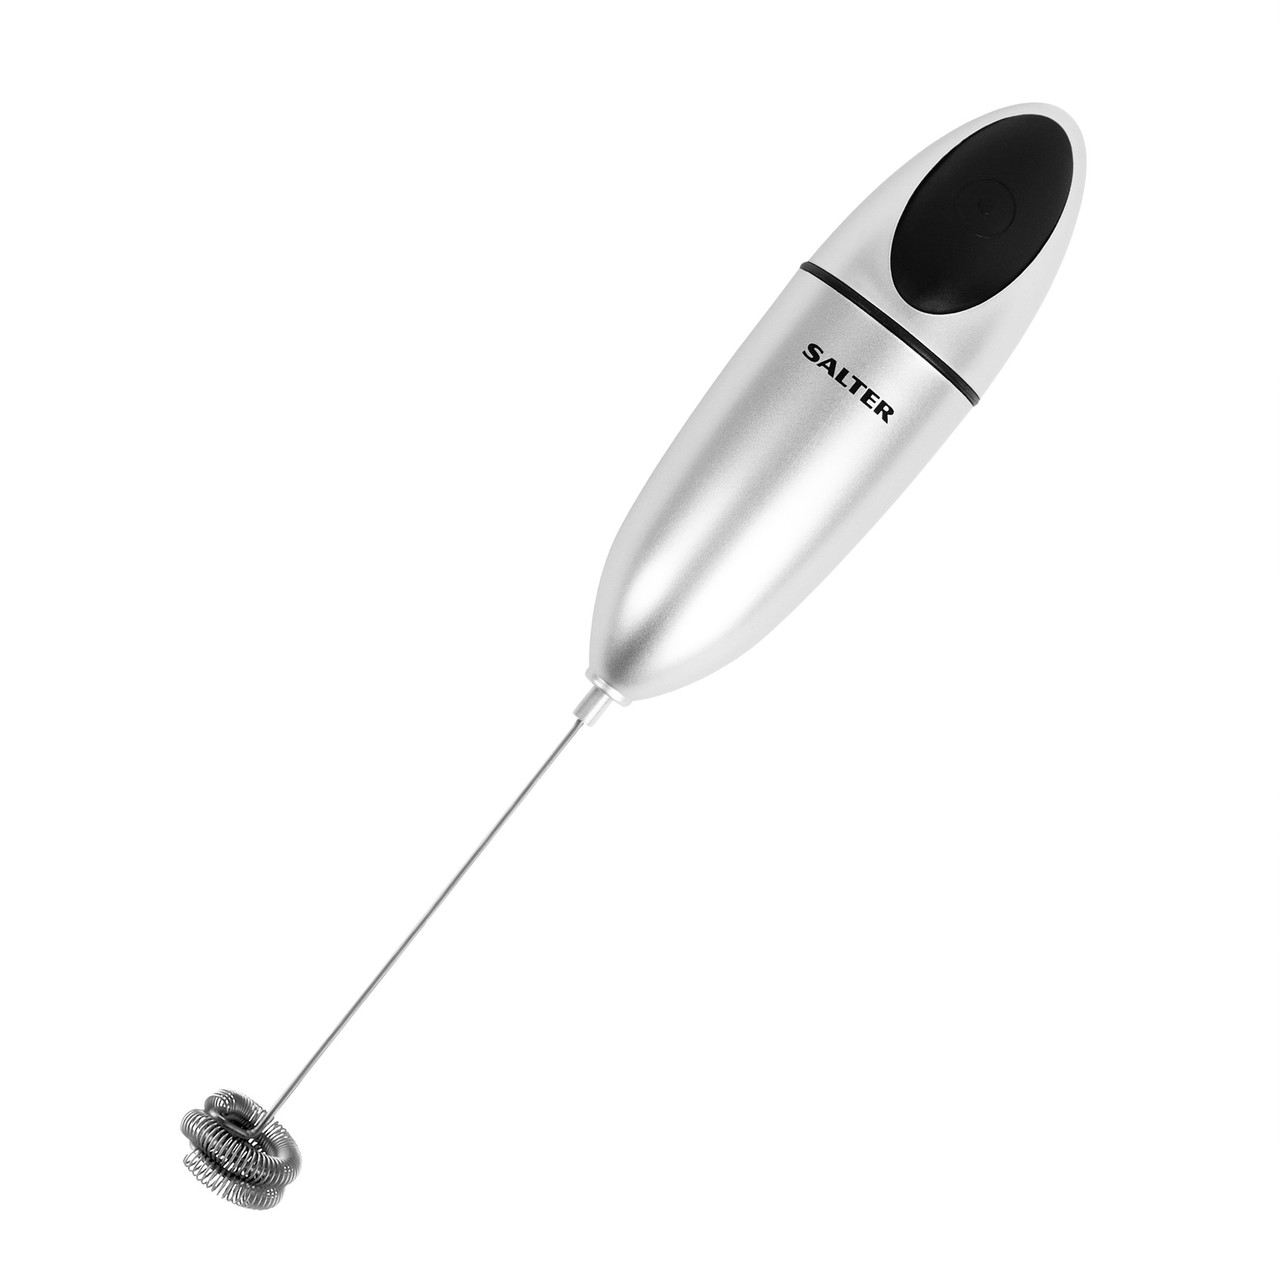 1pc Handheld Battery-operated Mini Mixer & Milk Frother With Stainless  Steel Whisk Head, Suitable For Whisking Egg , Frothing Milk And Beating  Cream In Home Kitchen